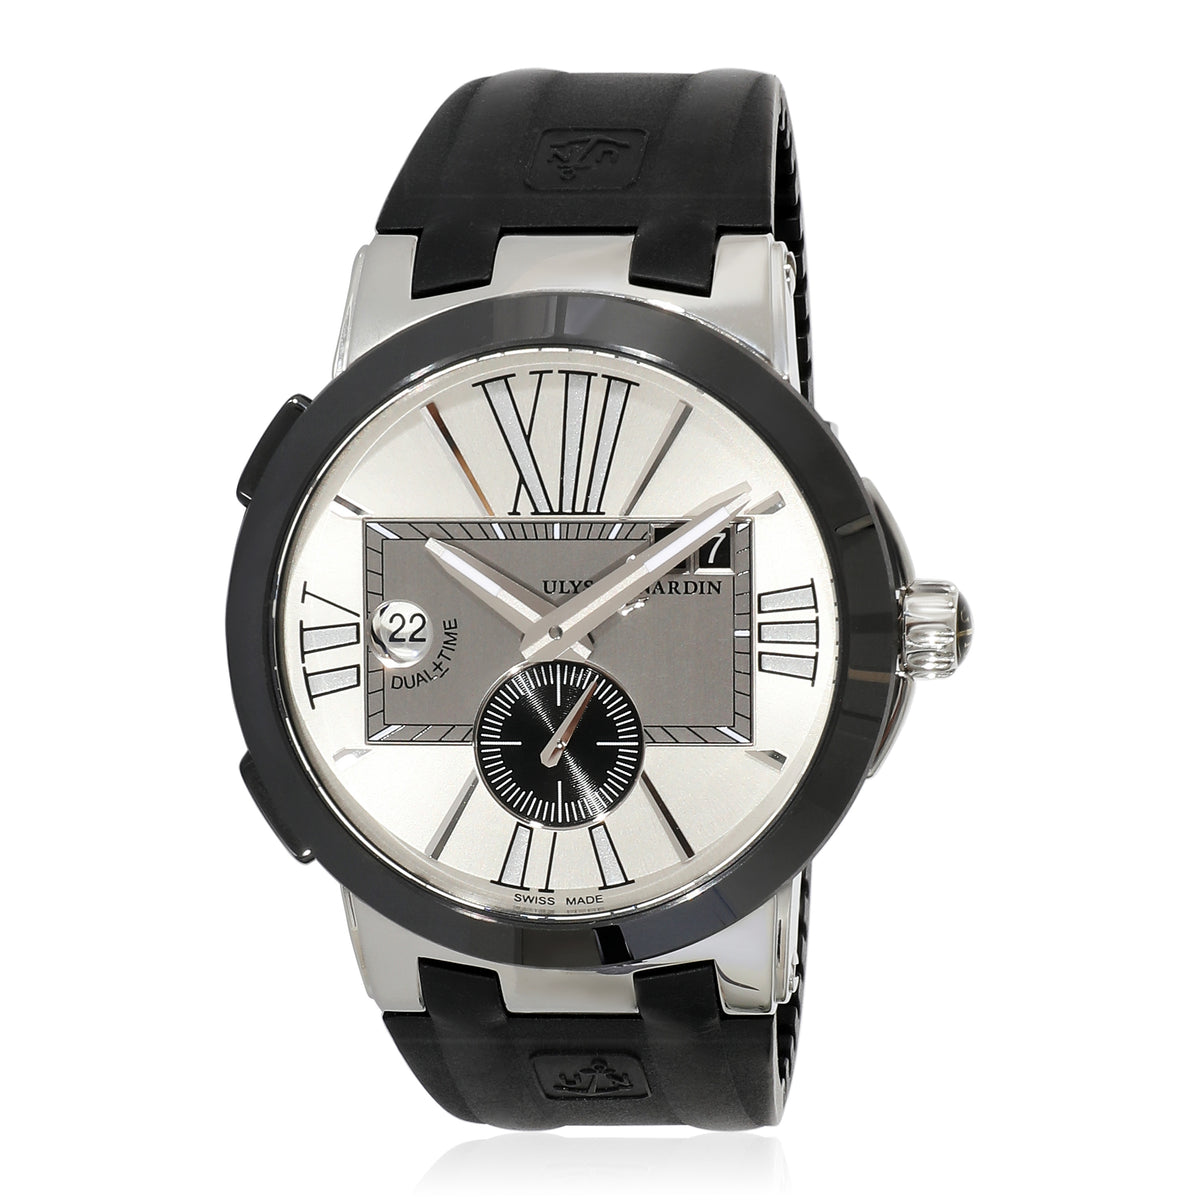 Executive Dual Time 243-00-3/42 Men's Watch in  Stainless Steel/Ce